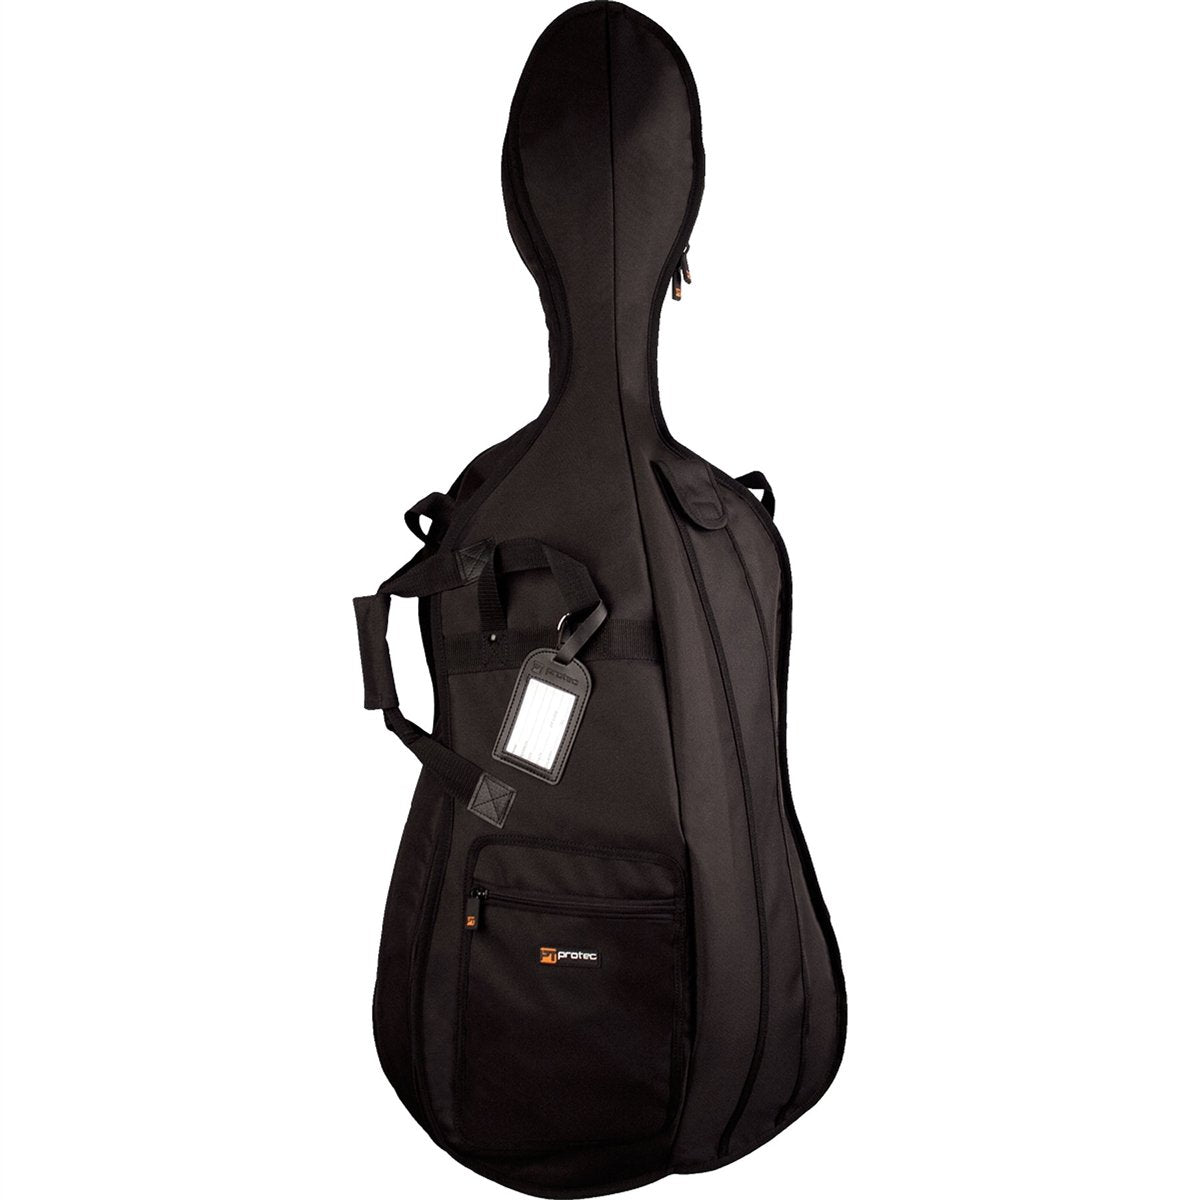 Protec - 4/4 Cello Gig Bag (Silver Series)-Accessories-Protec-Music Elements